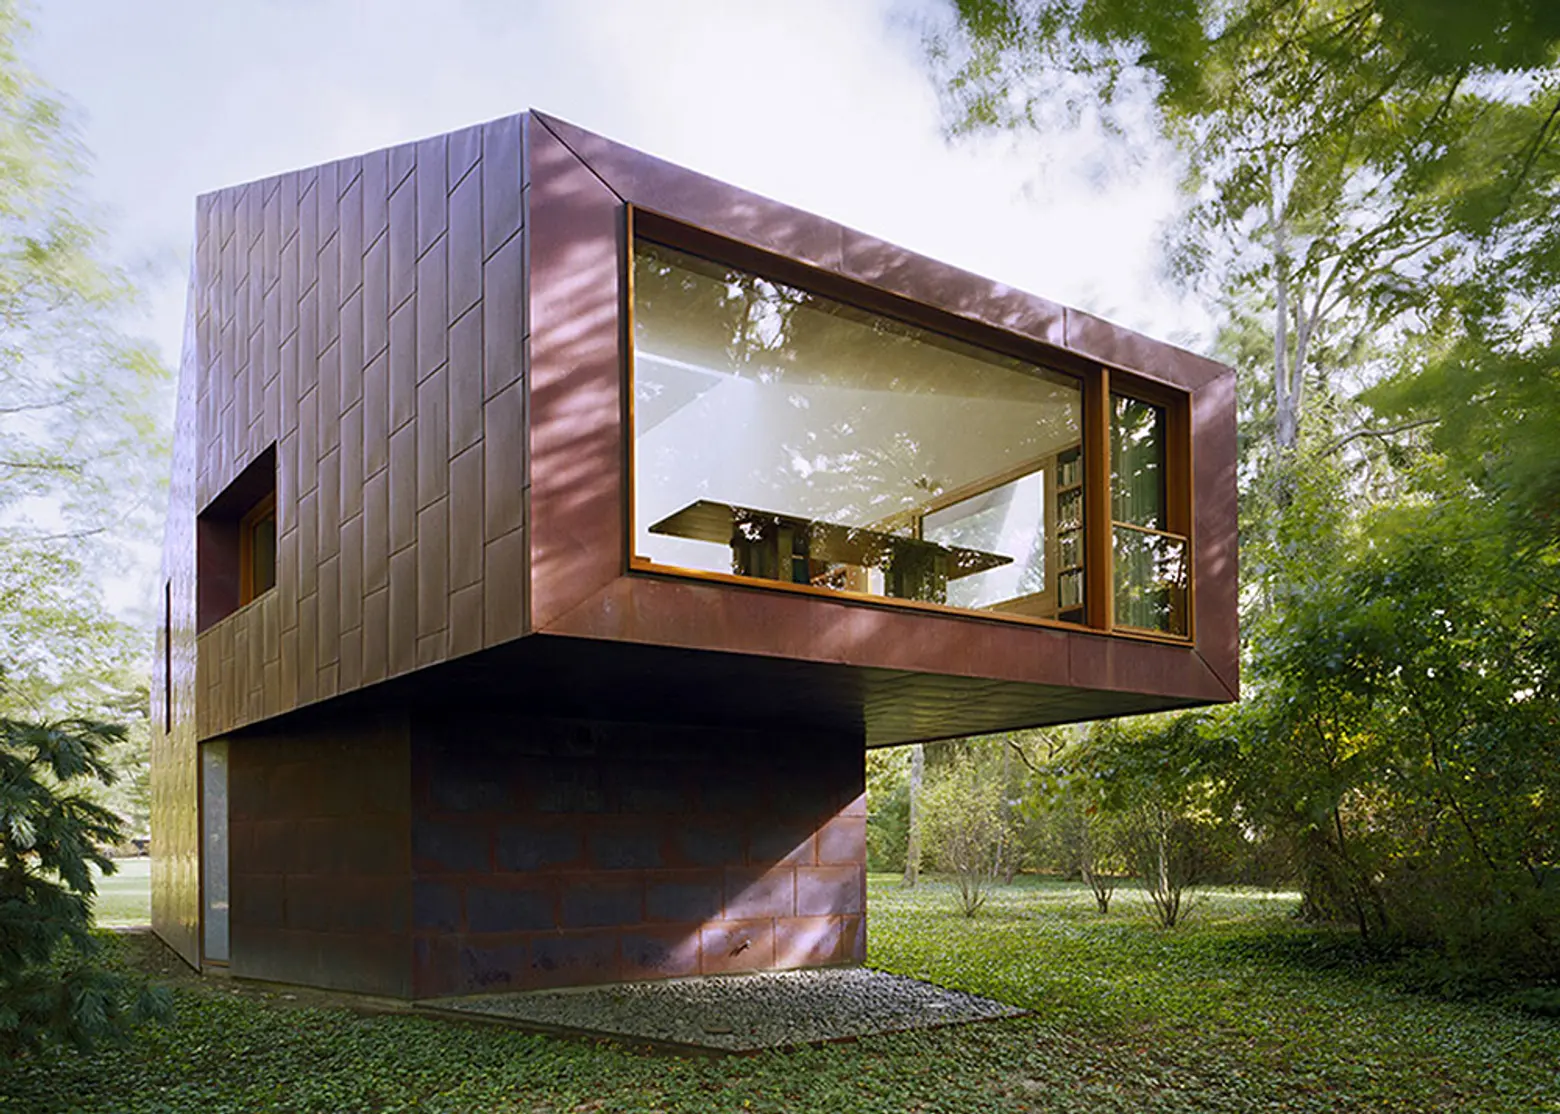 Copper-Clad Writer’s Cabin by Andrew Berman Changes Color with the Sun